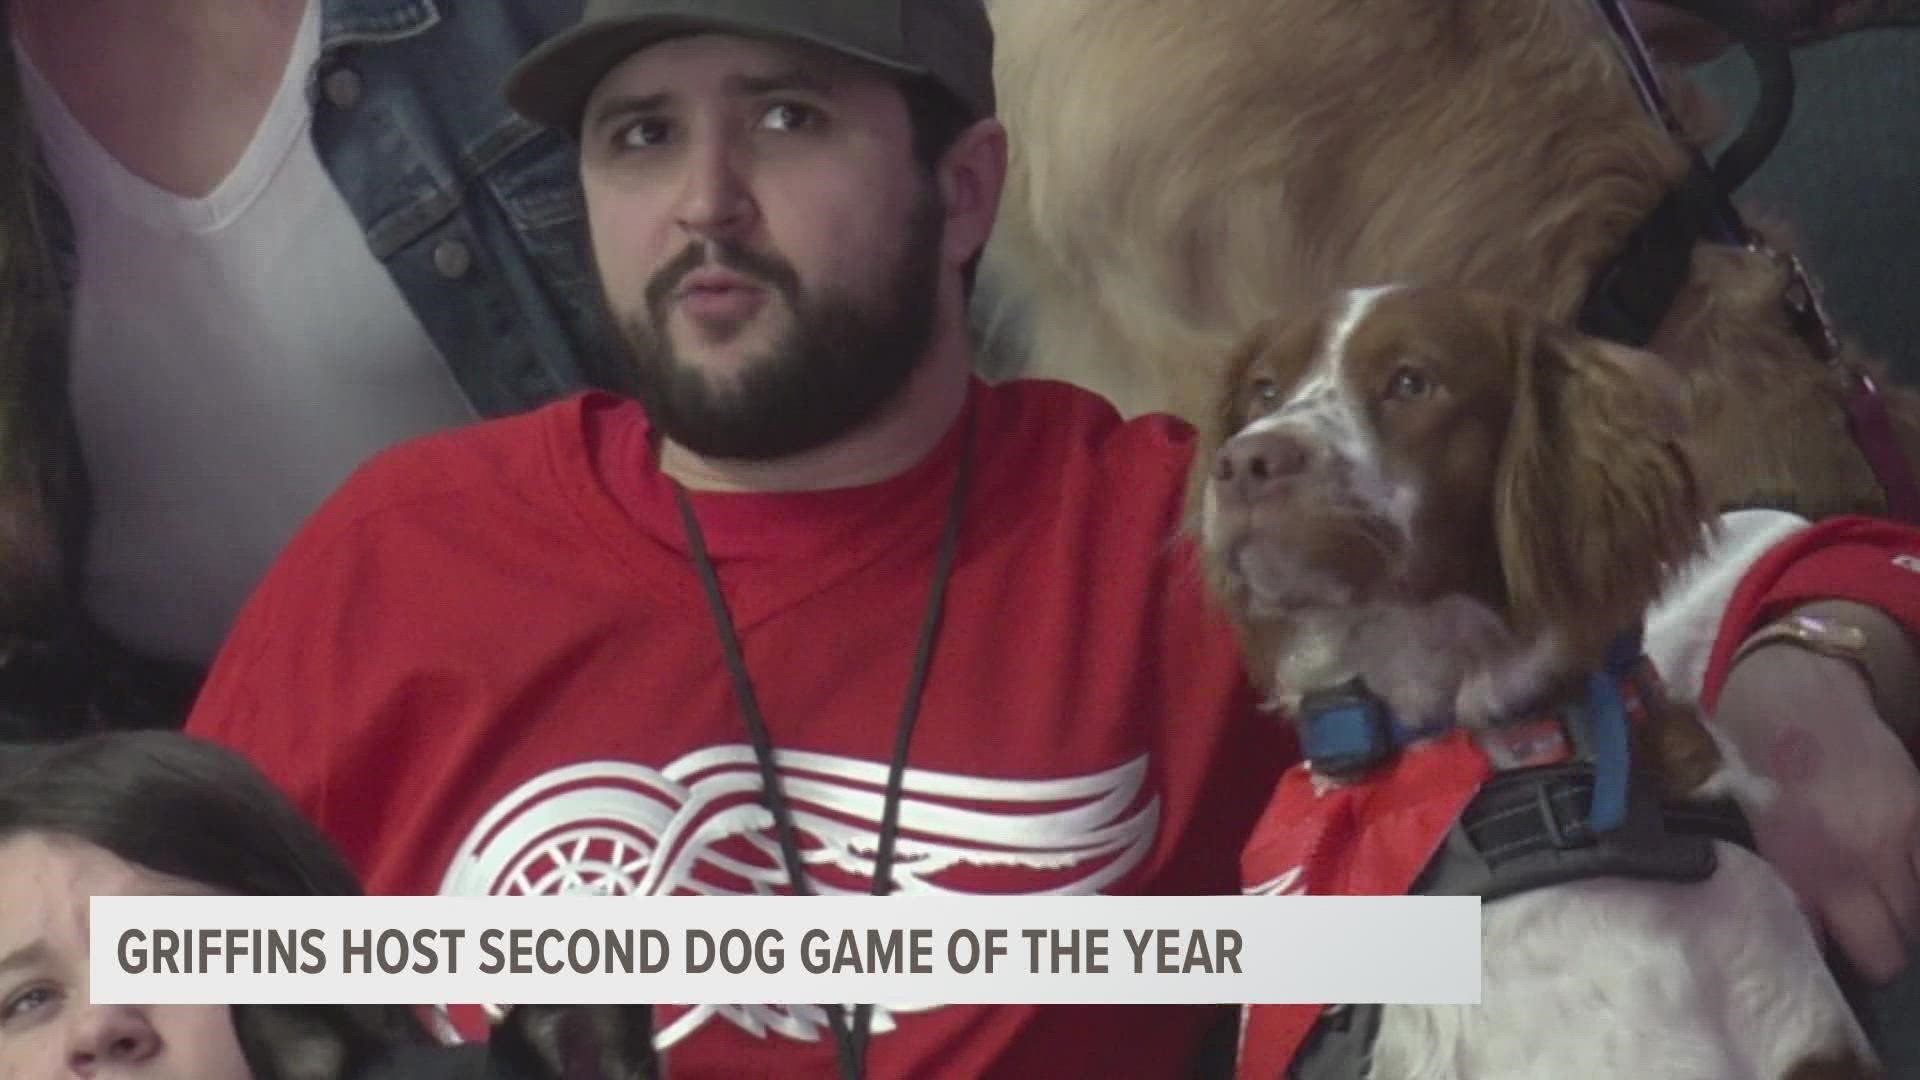 Since his death in 2018, the Griffins have named their dog night in honor of former staff member Jake Engel, who originally organized the event.